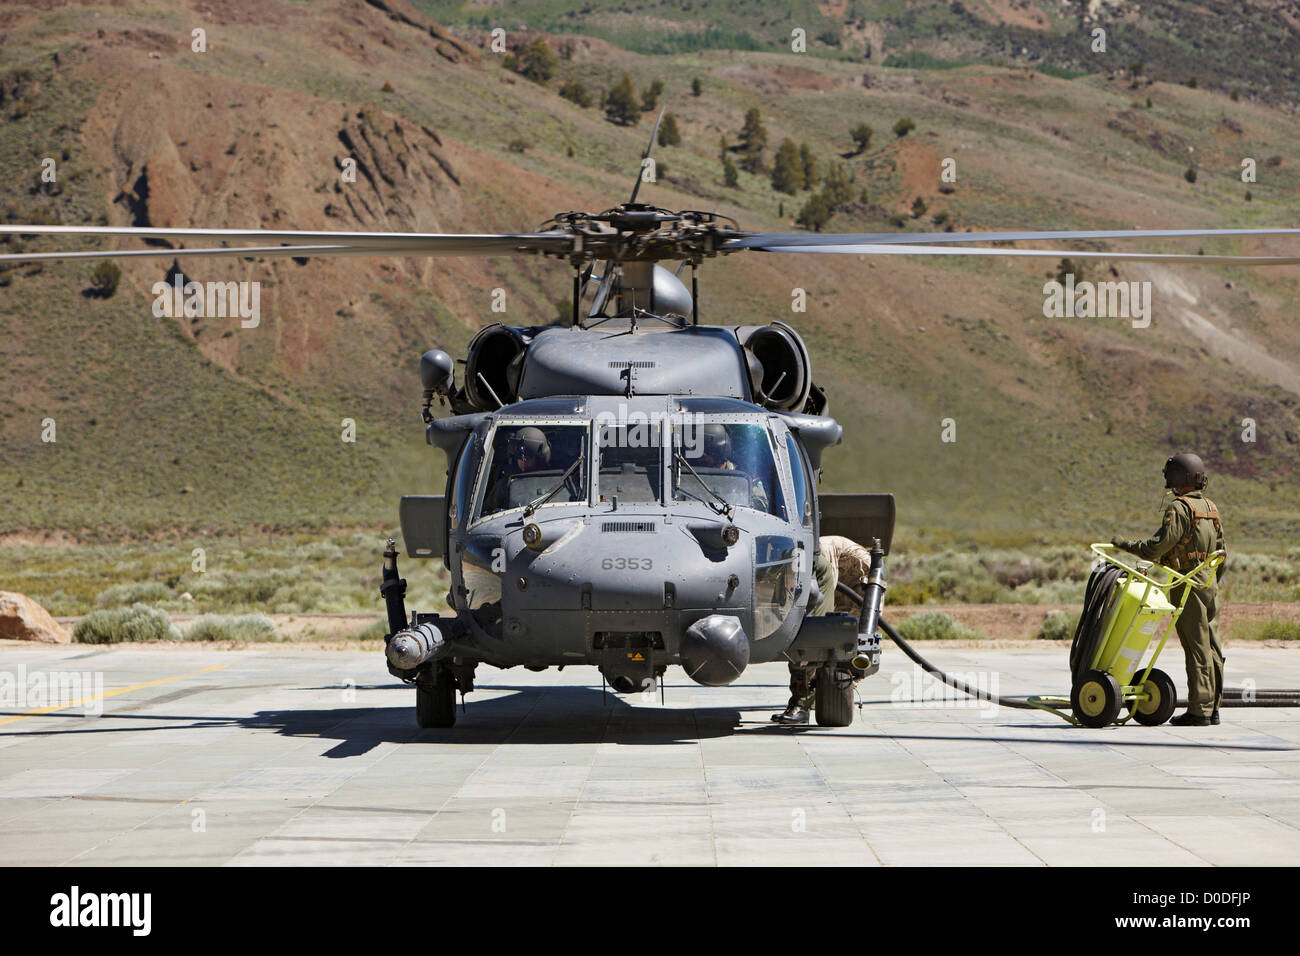 MH-60 Pave Hawk, a special operations variant of the Sikorsky UH-60 Black Hawk helicopter. Stock Photo